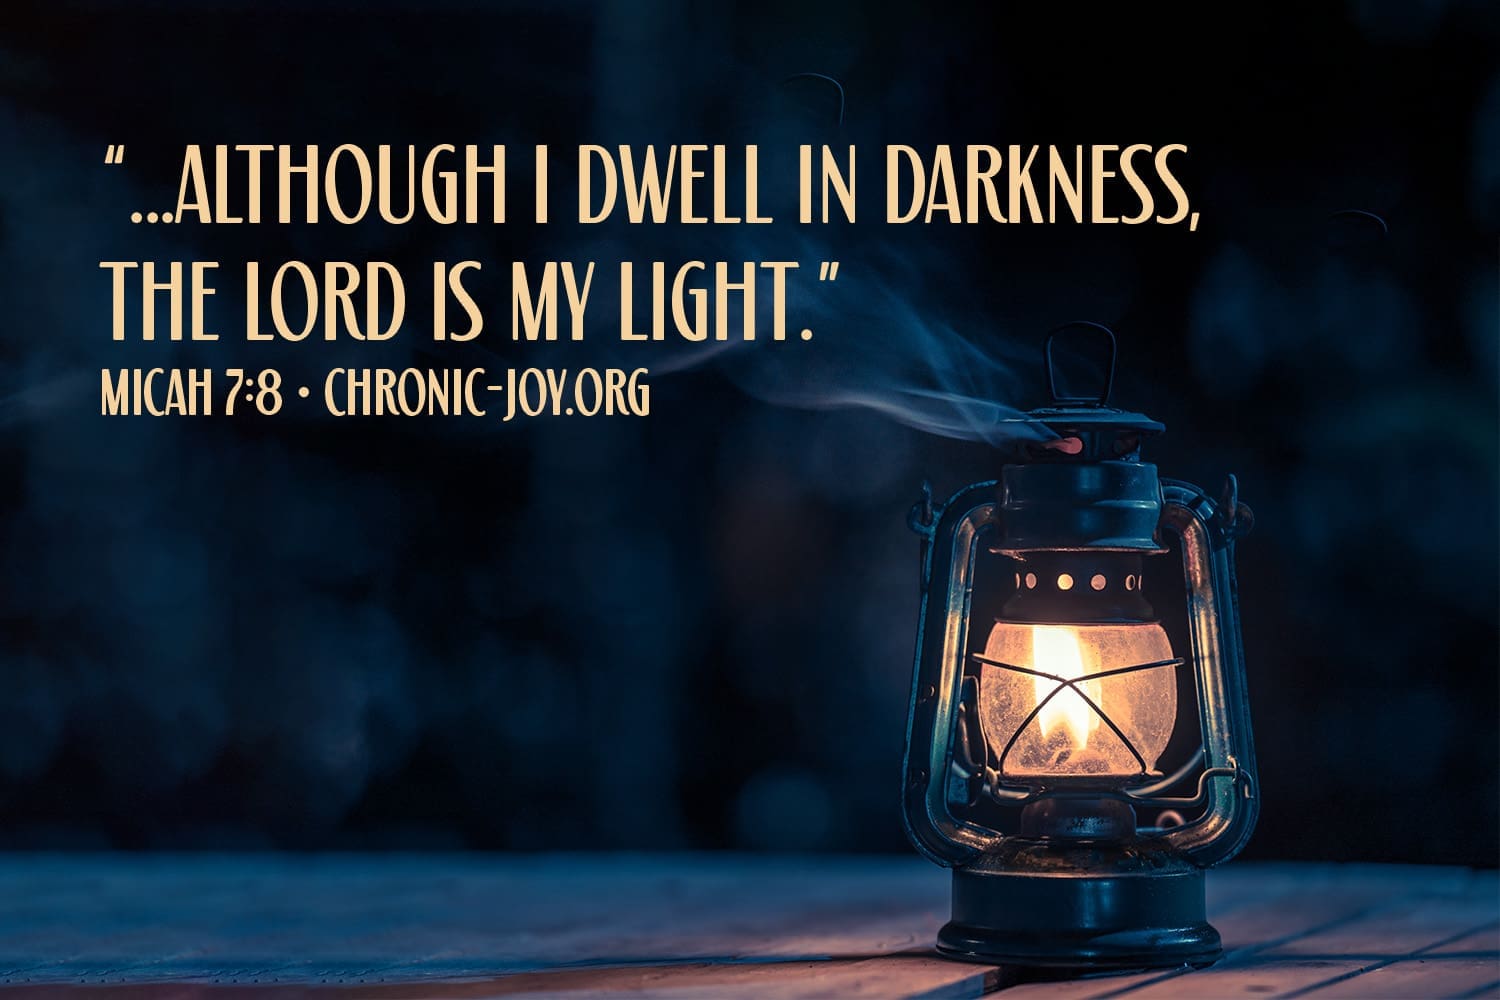 "...although I dwell in darkness, the Lord is my light." Micah 7:8